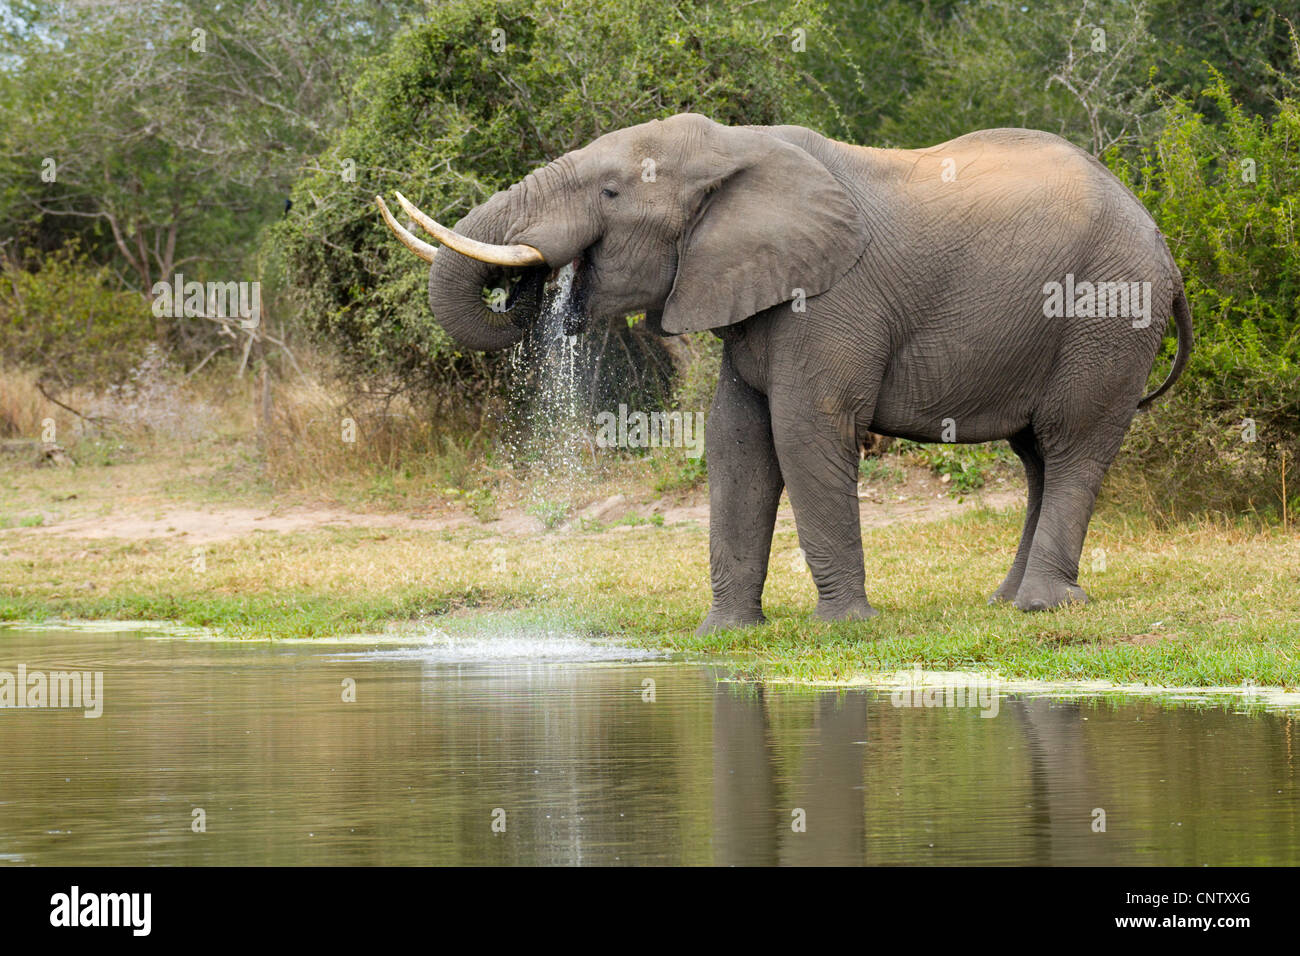 African Elephant Bull (Loxodonta africana) drinking water from a natural pan in South Africa's Kruger National Park Stock Photo